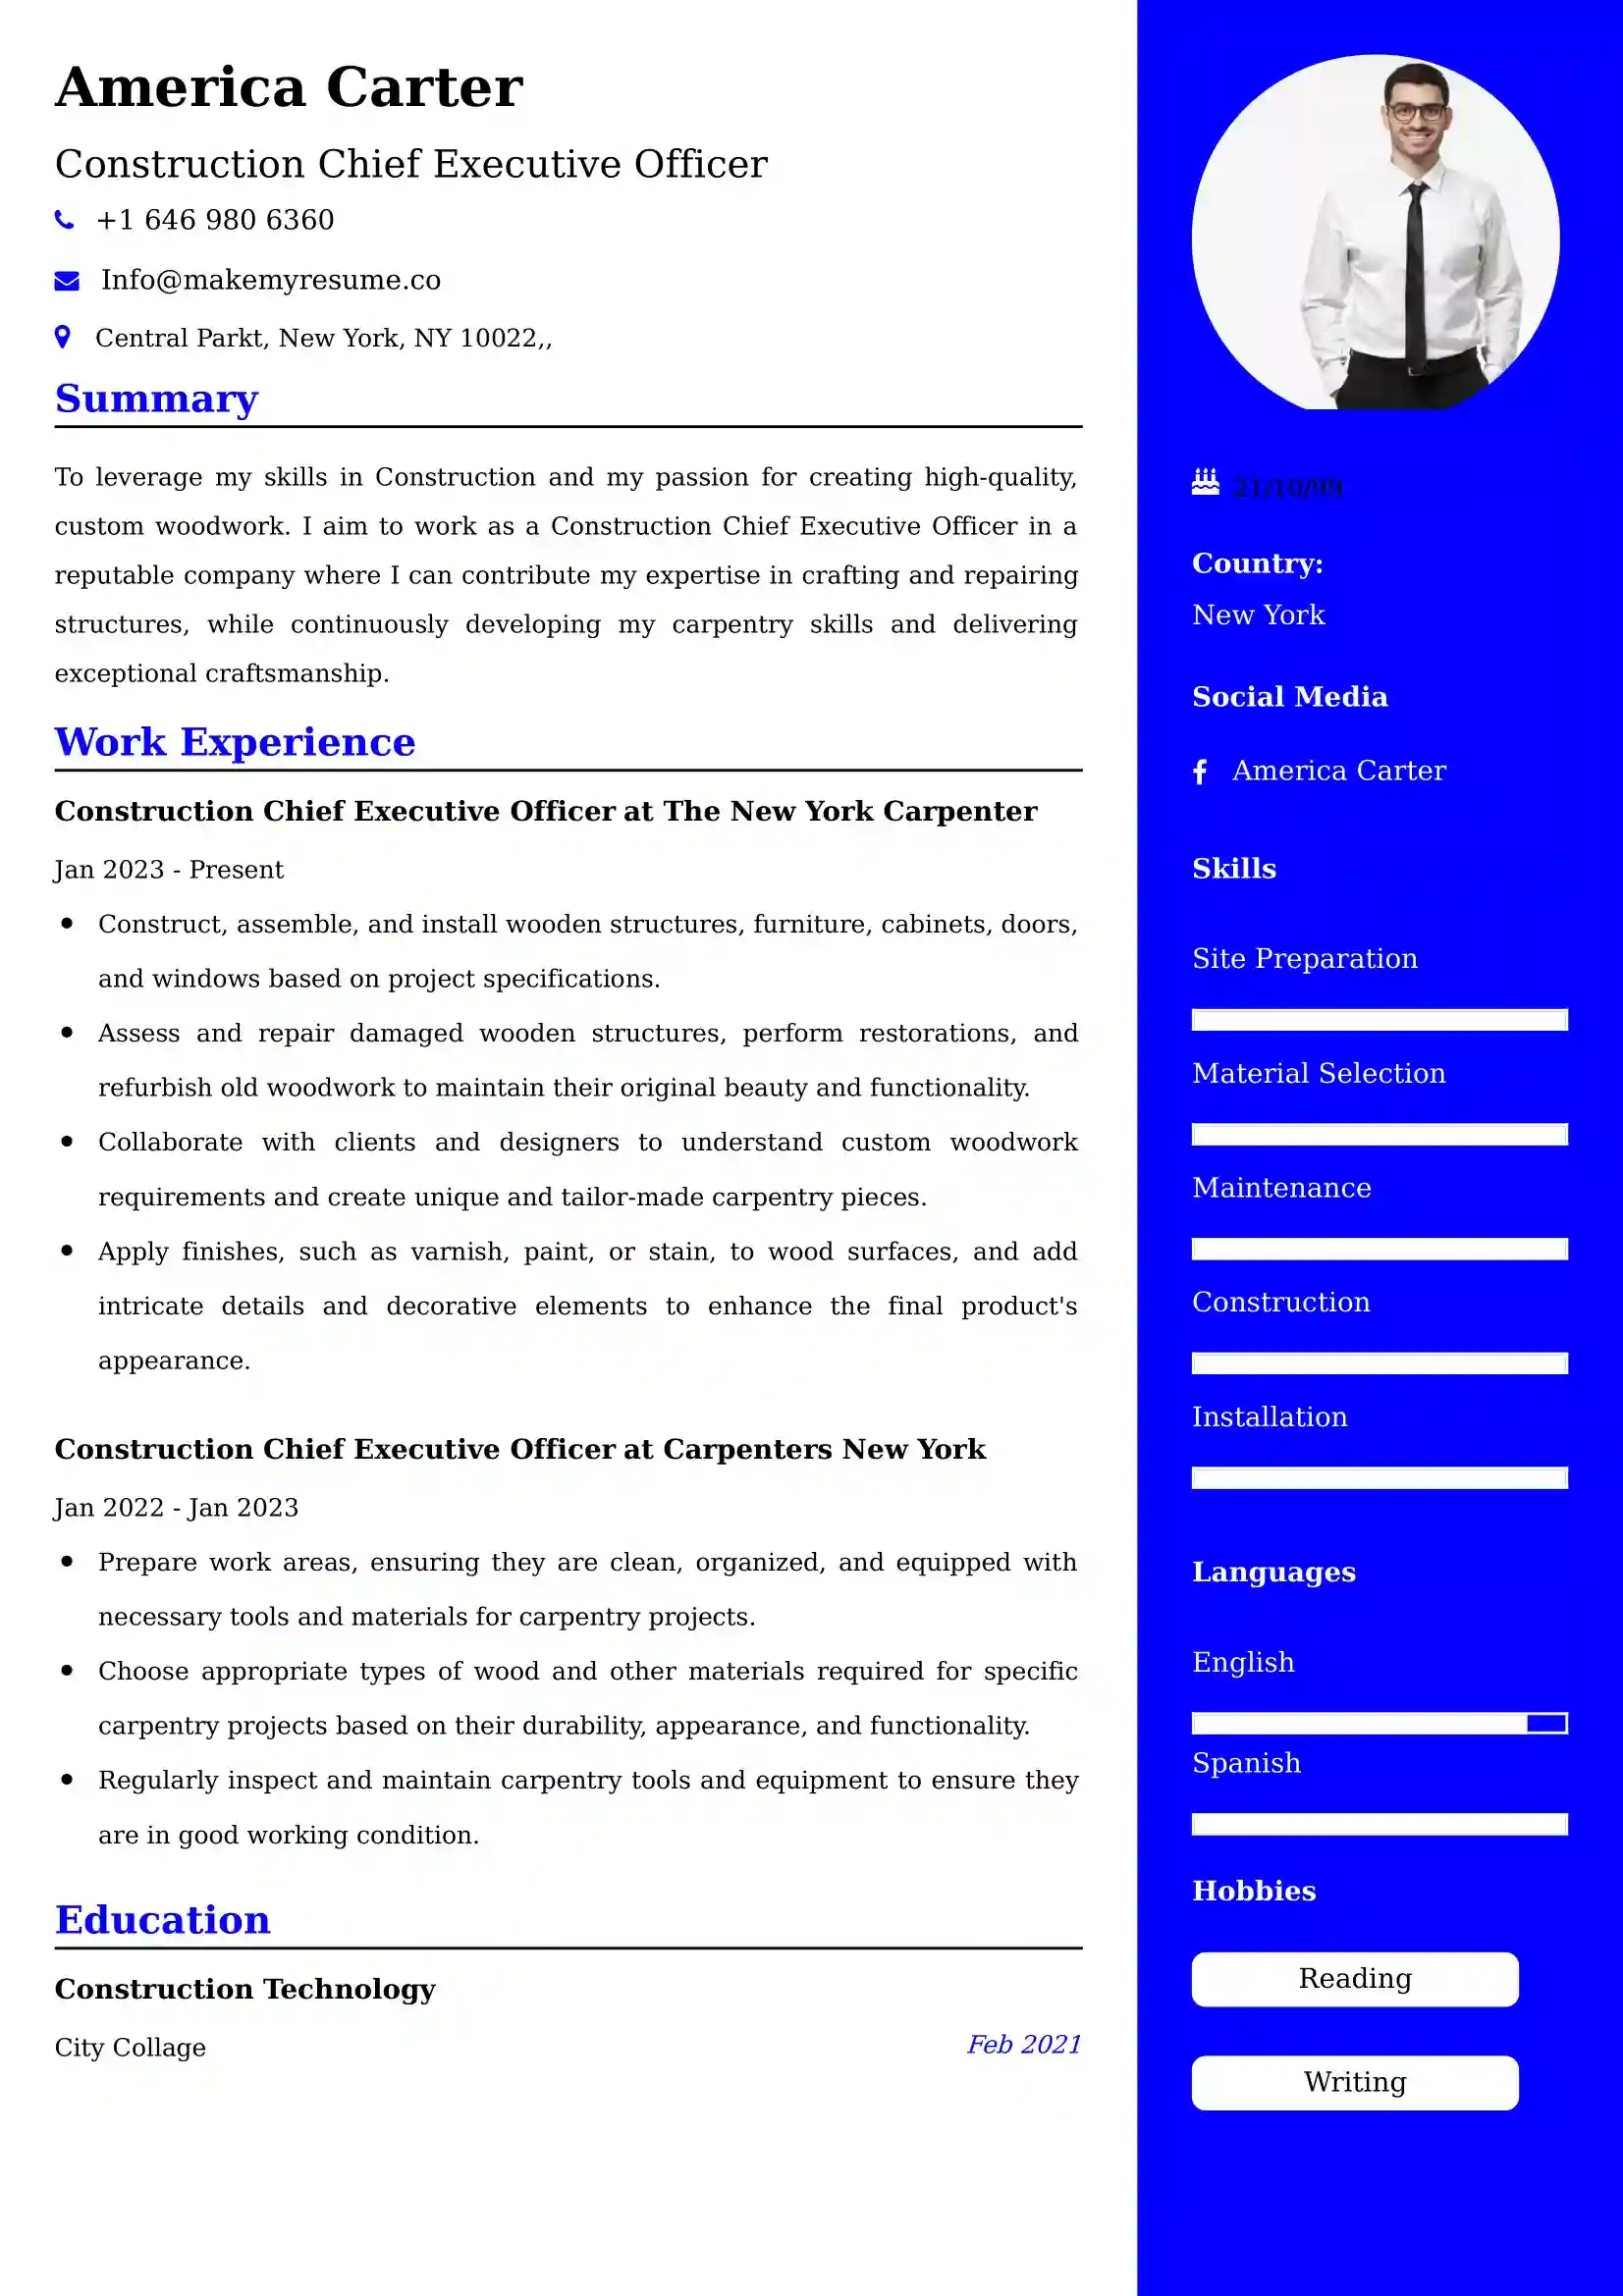 Construction Chief Executive Officer Resume Examples for UK Jobs - Tips and Guide